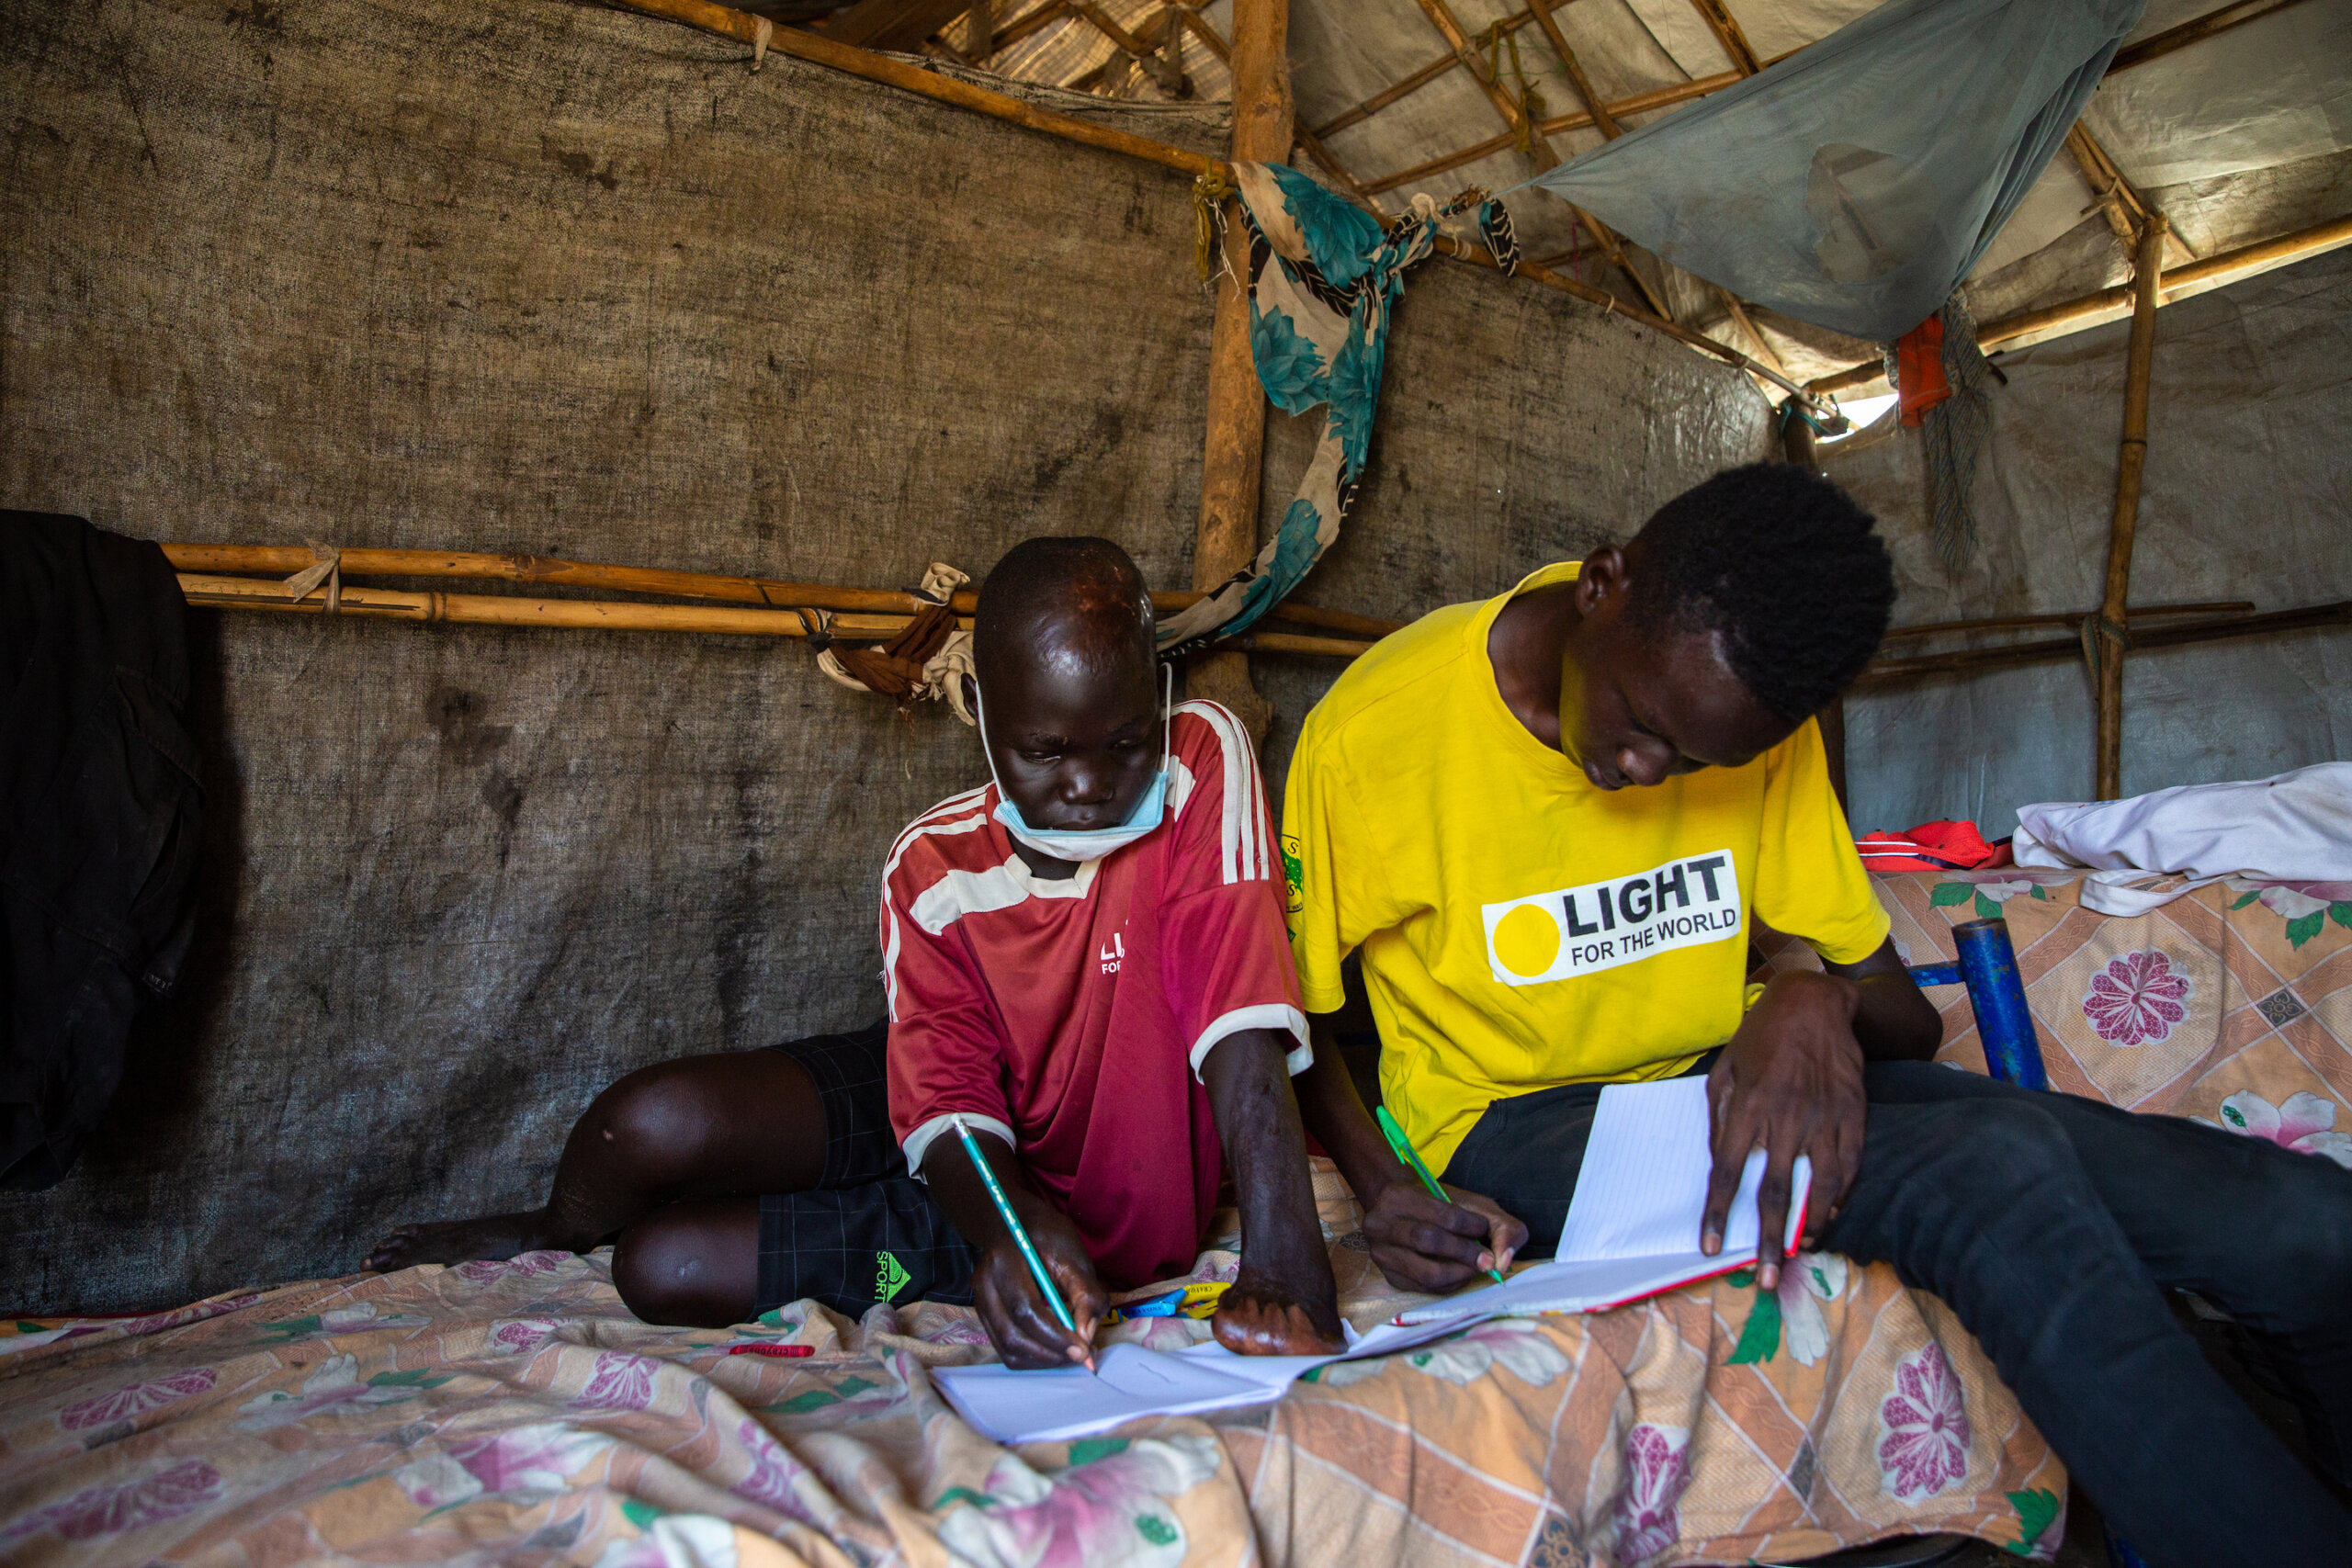 Juma John sits next to his friend and tutor Akoi Mayen Kur in an IDP camp in South Sudan. John is on the left, wearing a red top, while Akoi is wearing a yellow Light for the World top. They both look studious and are writing in books.